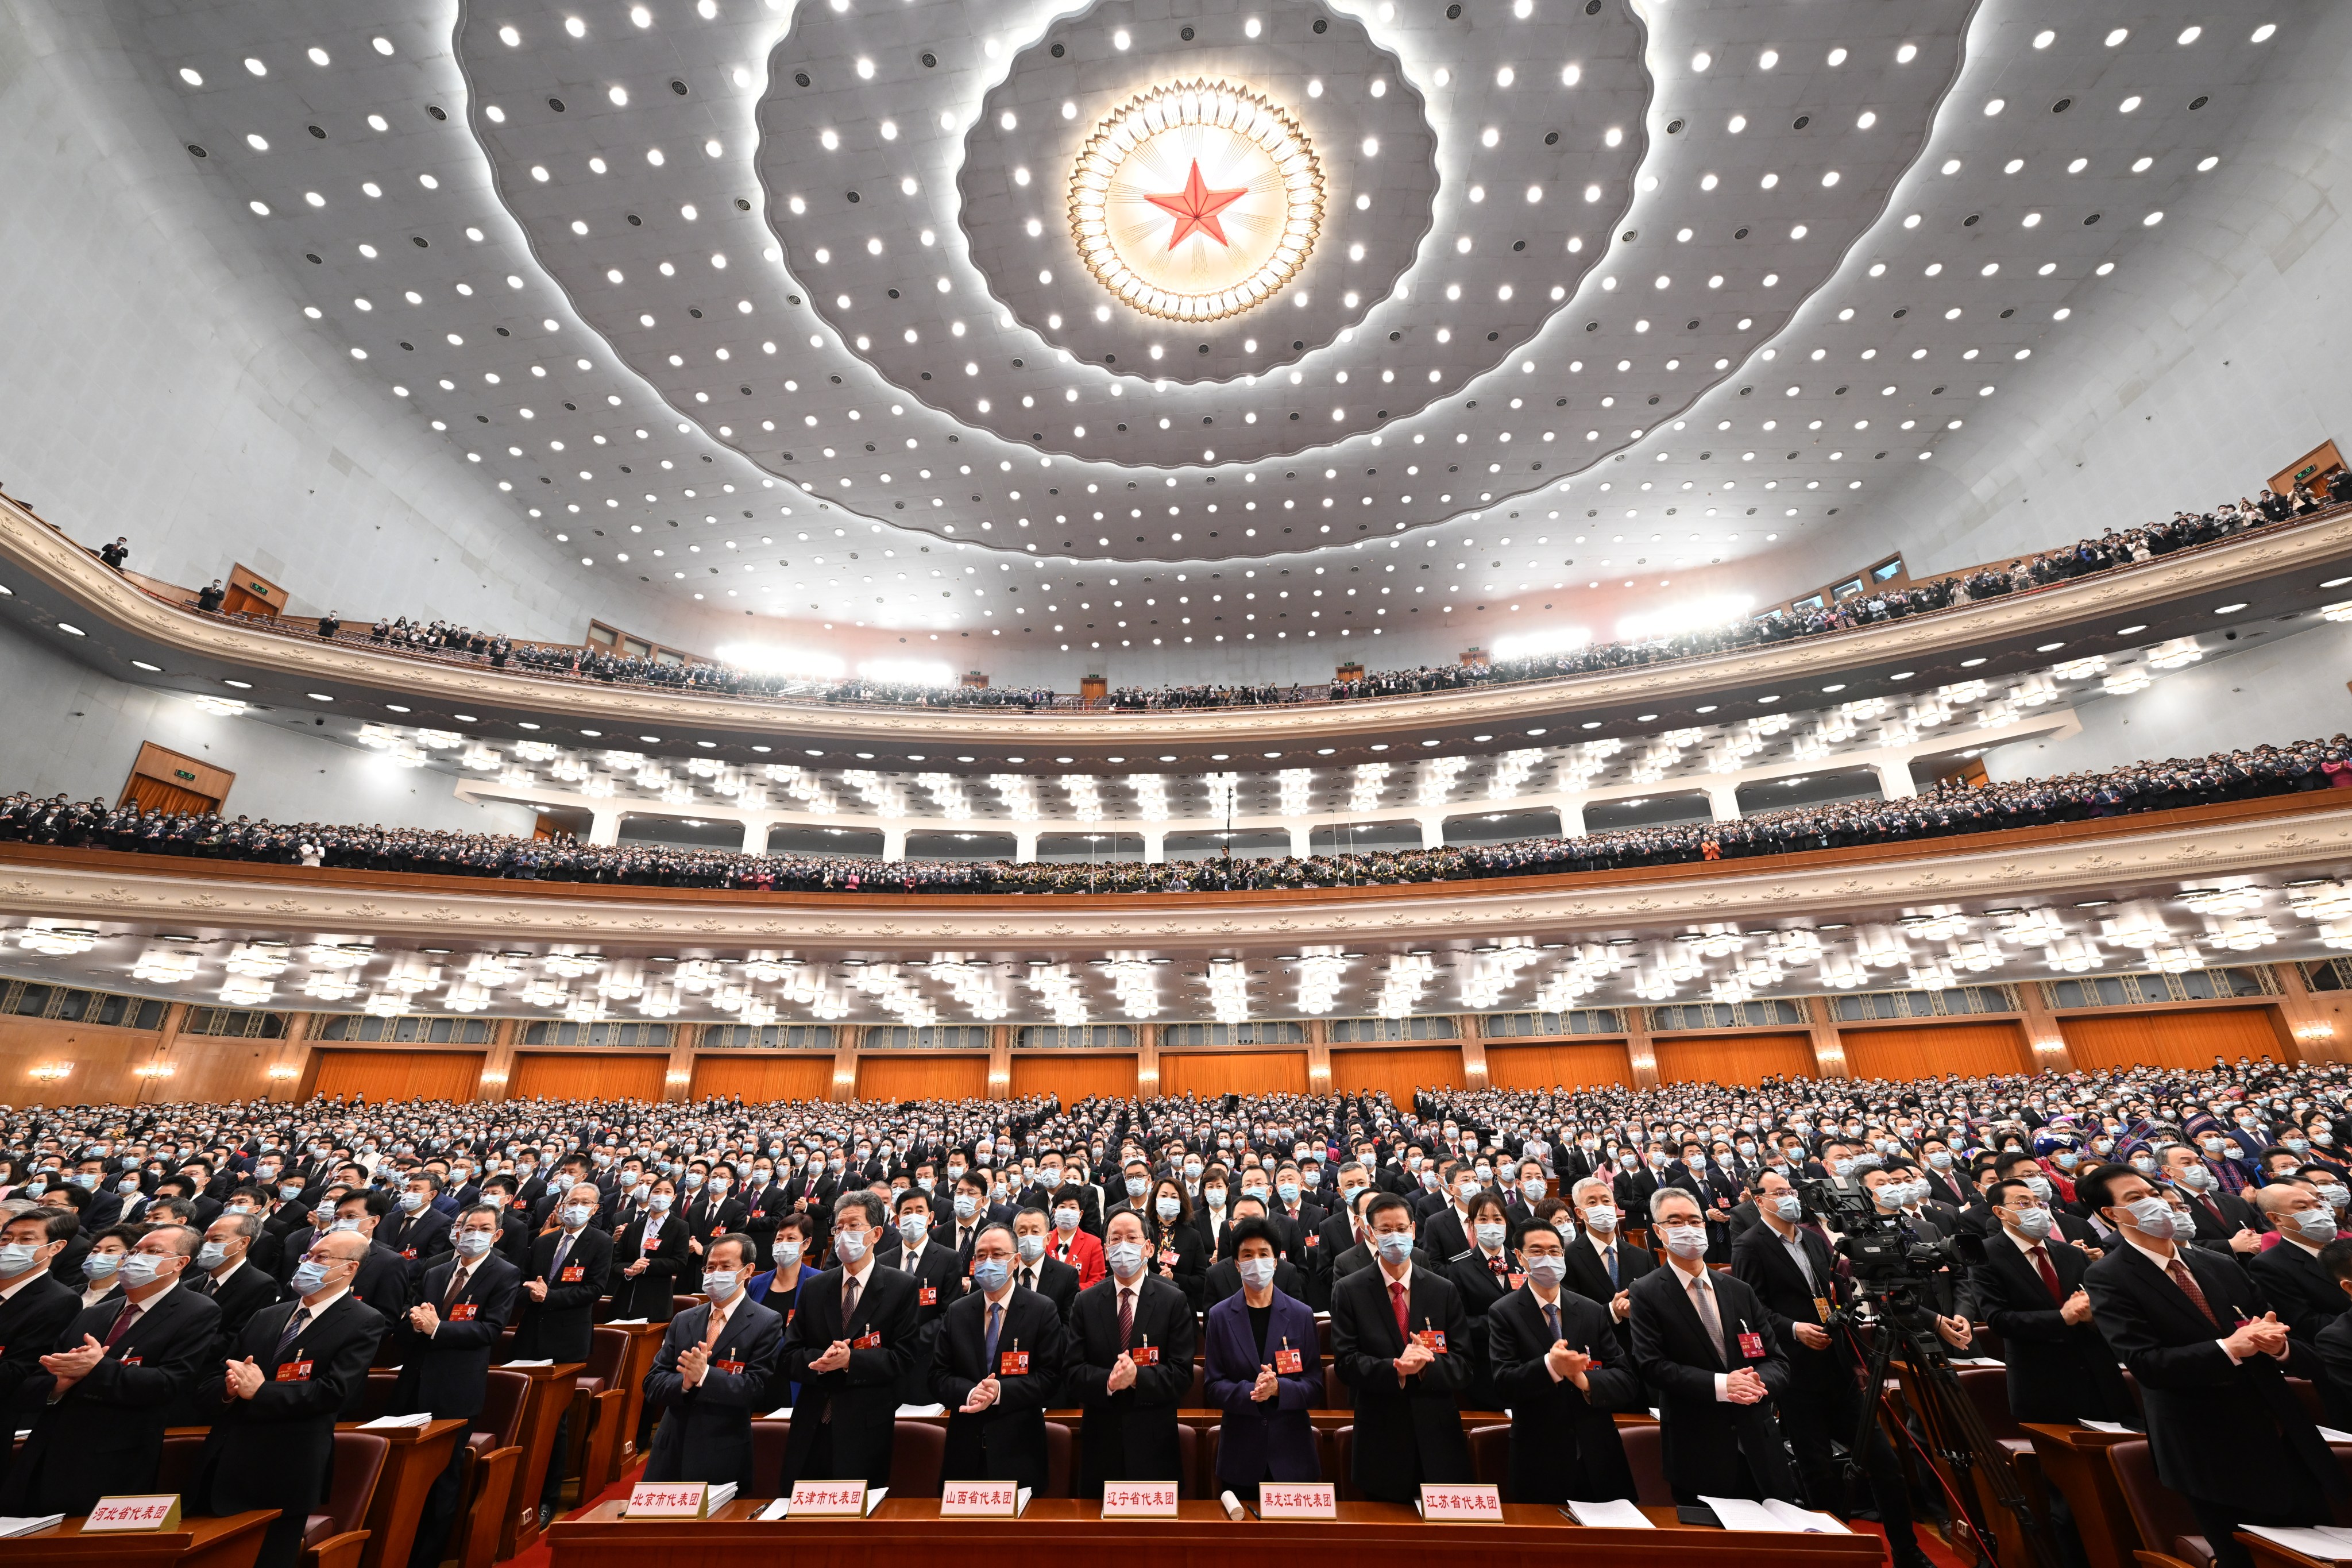 Beijing is extending its overhaul of the restructuring of central party and government organs to its provincial governments. All of its 31 provincial-level governments have reported back on their progress. Photo: Xinhua